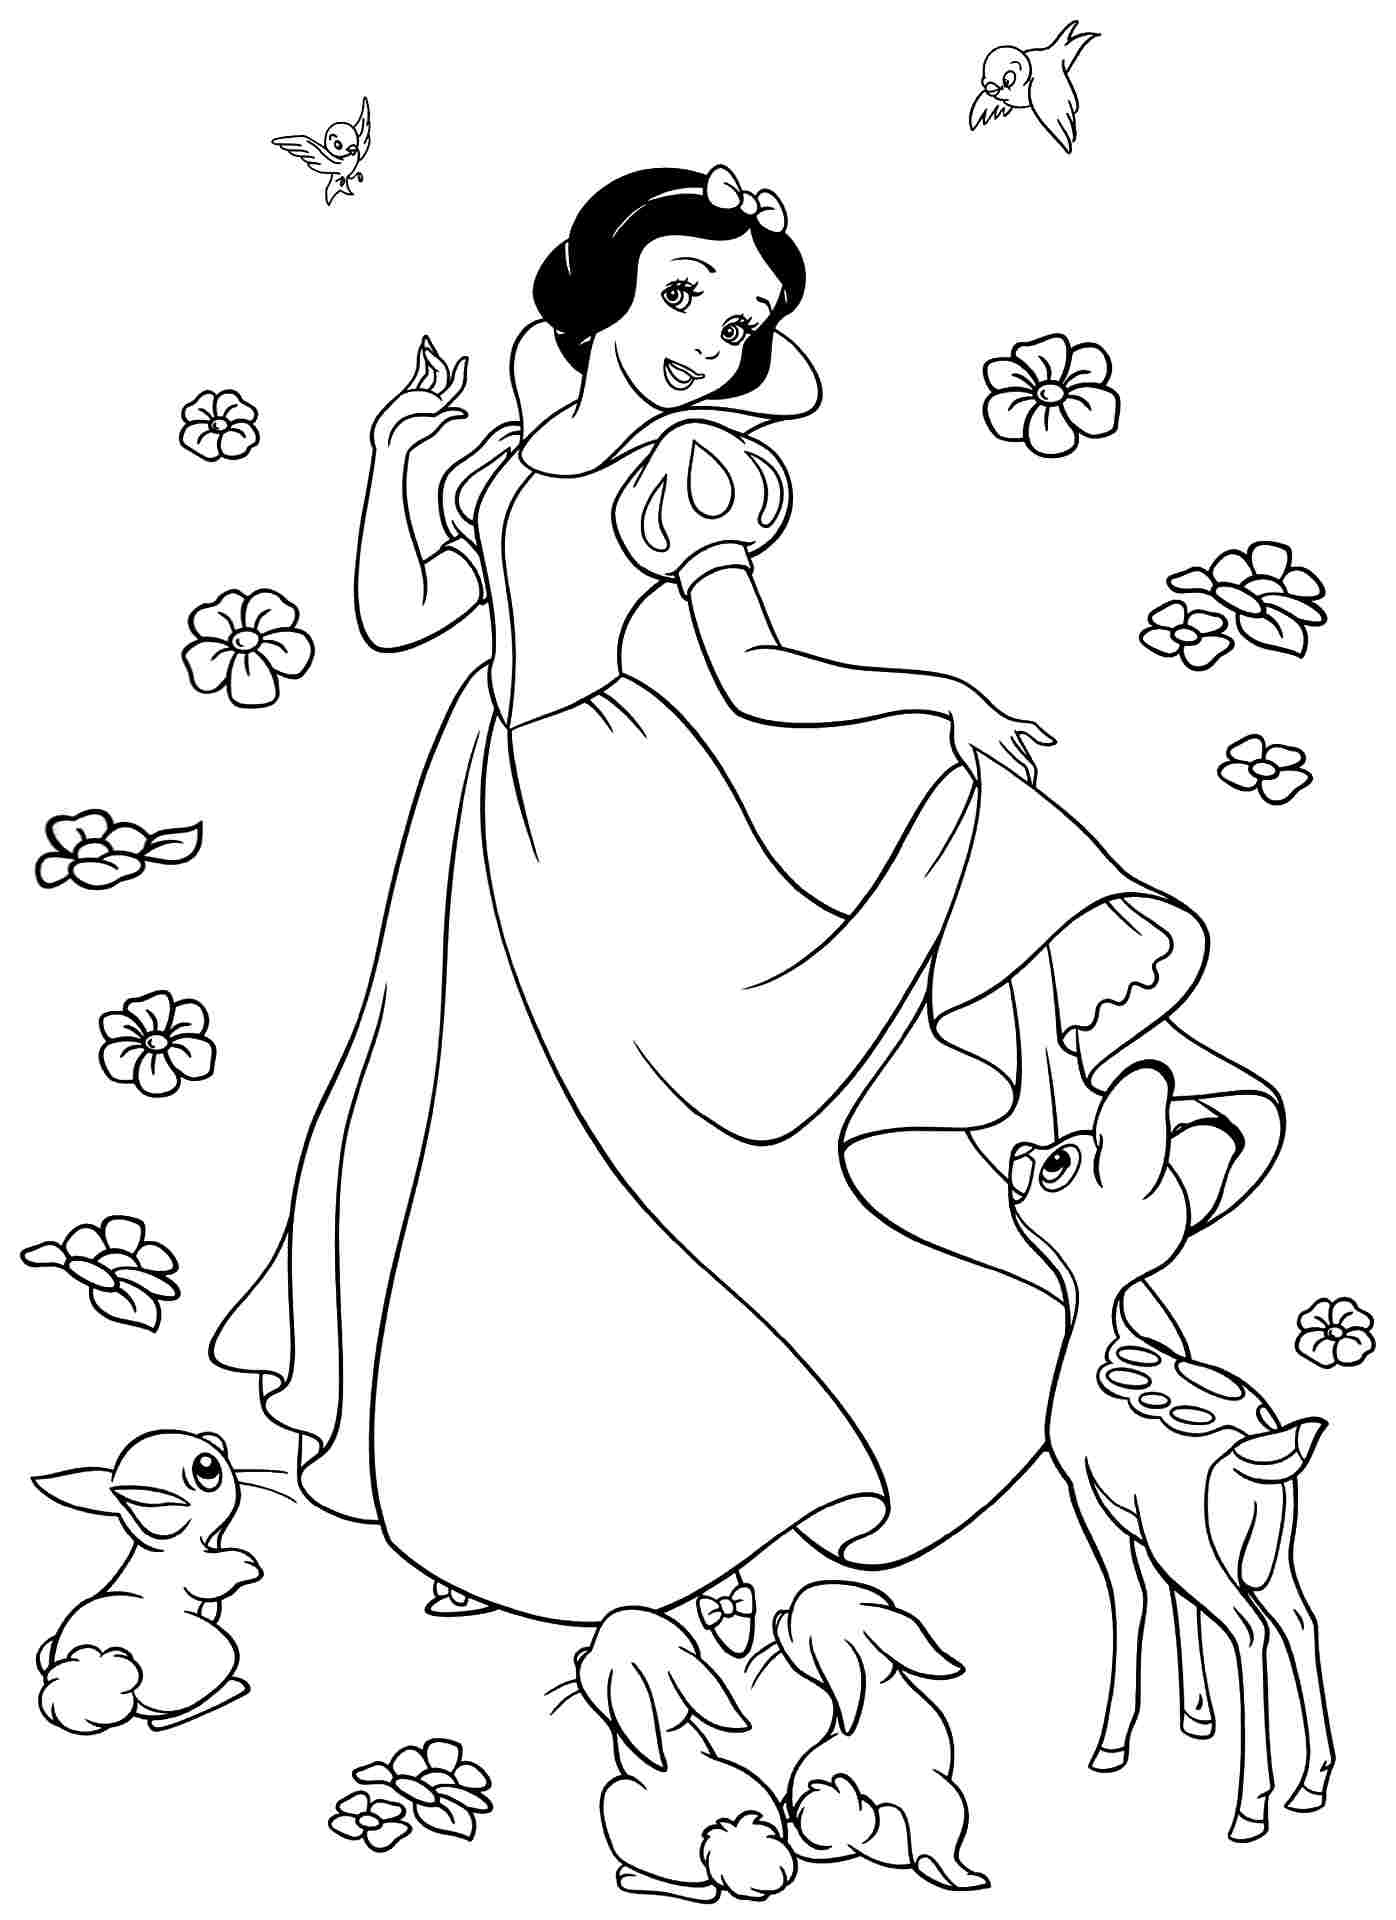 Snow White Coloring Pages - Best Coloring Pages For Kids